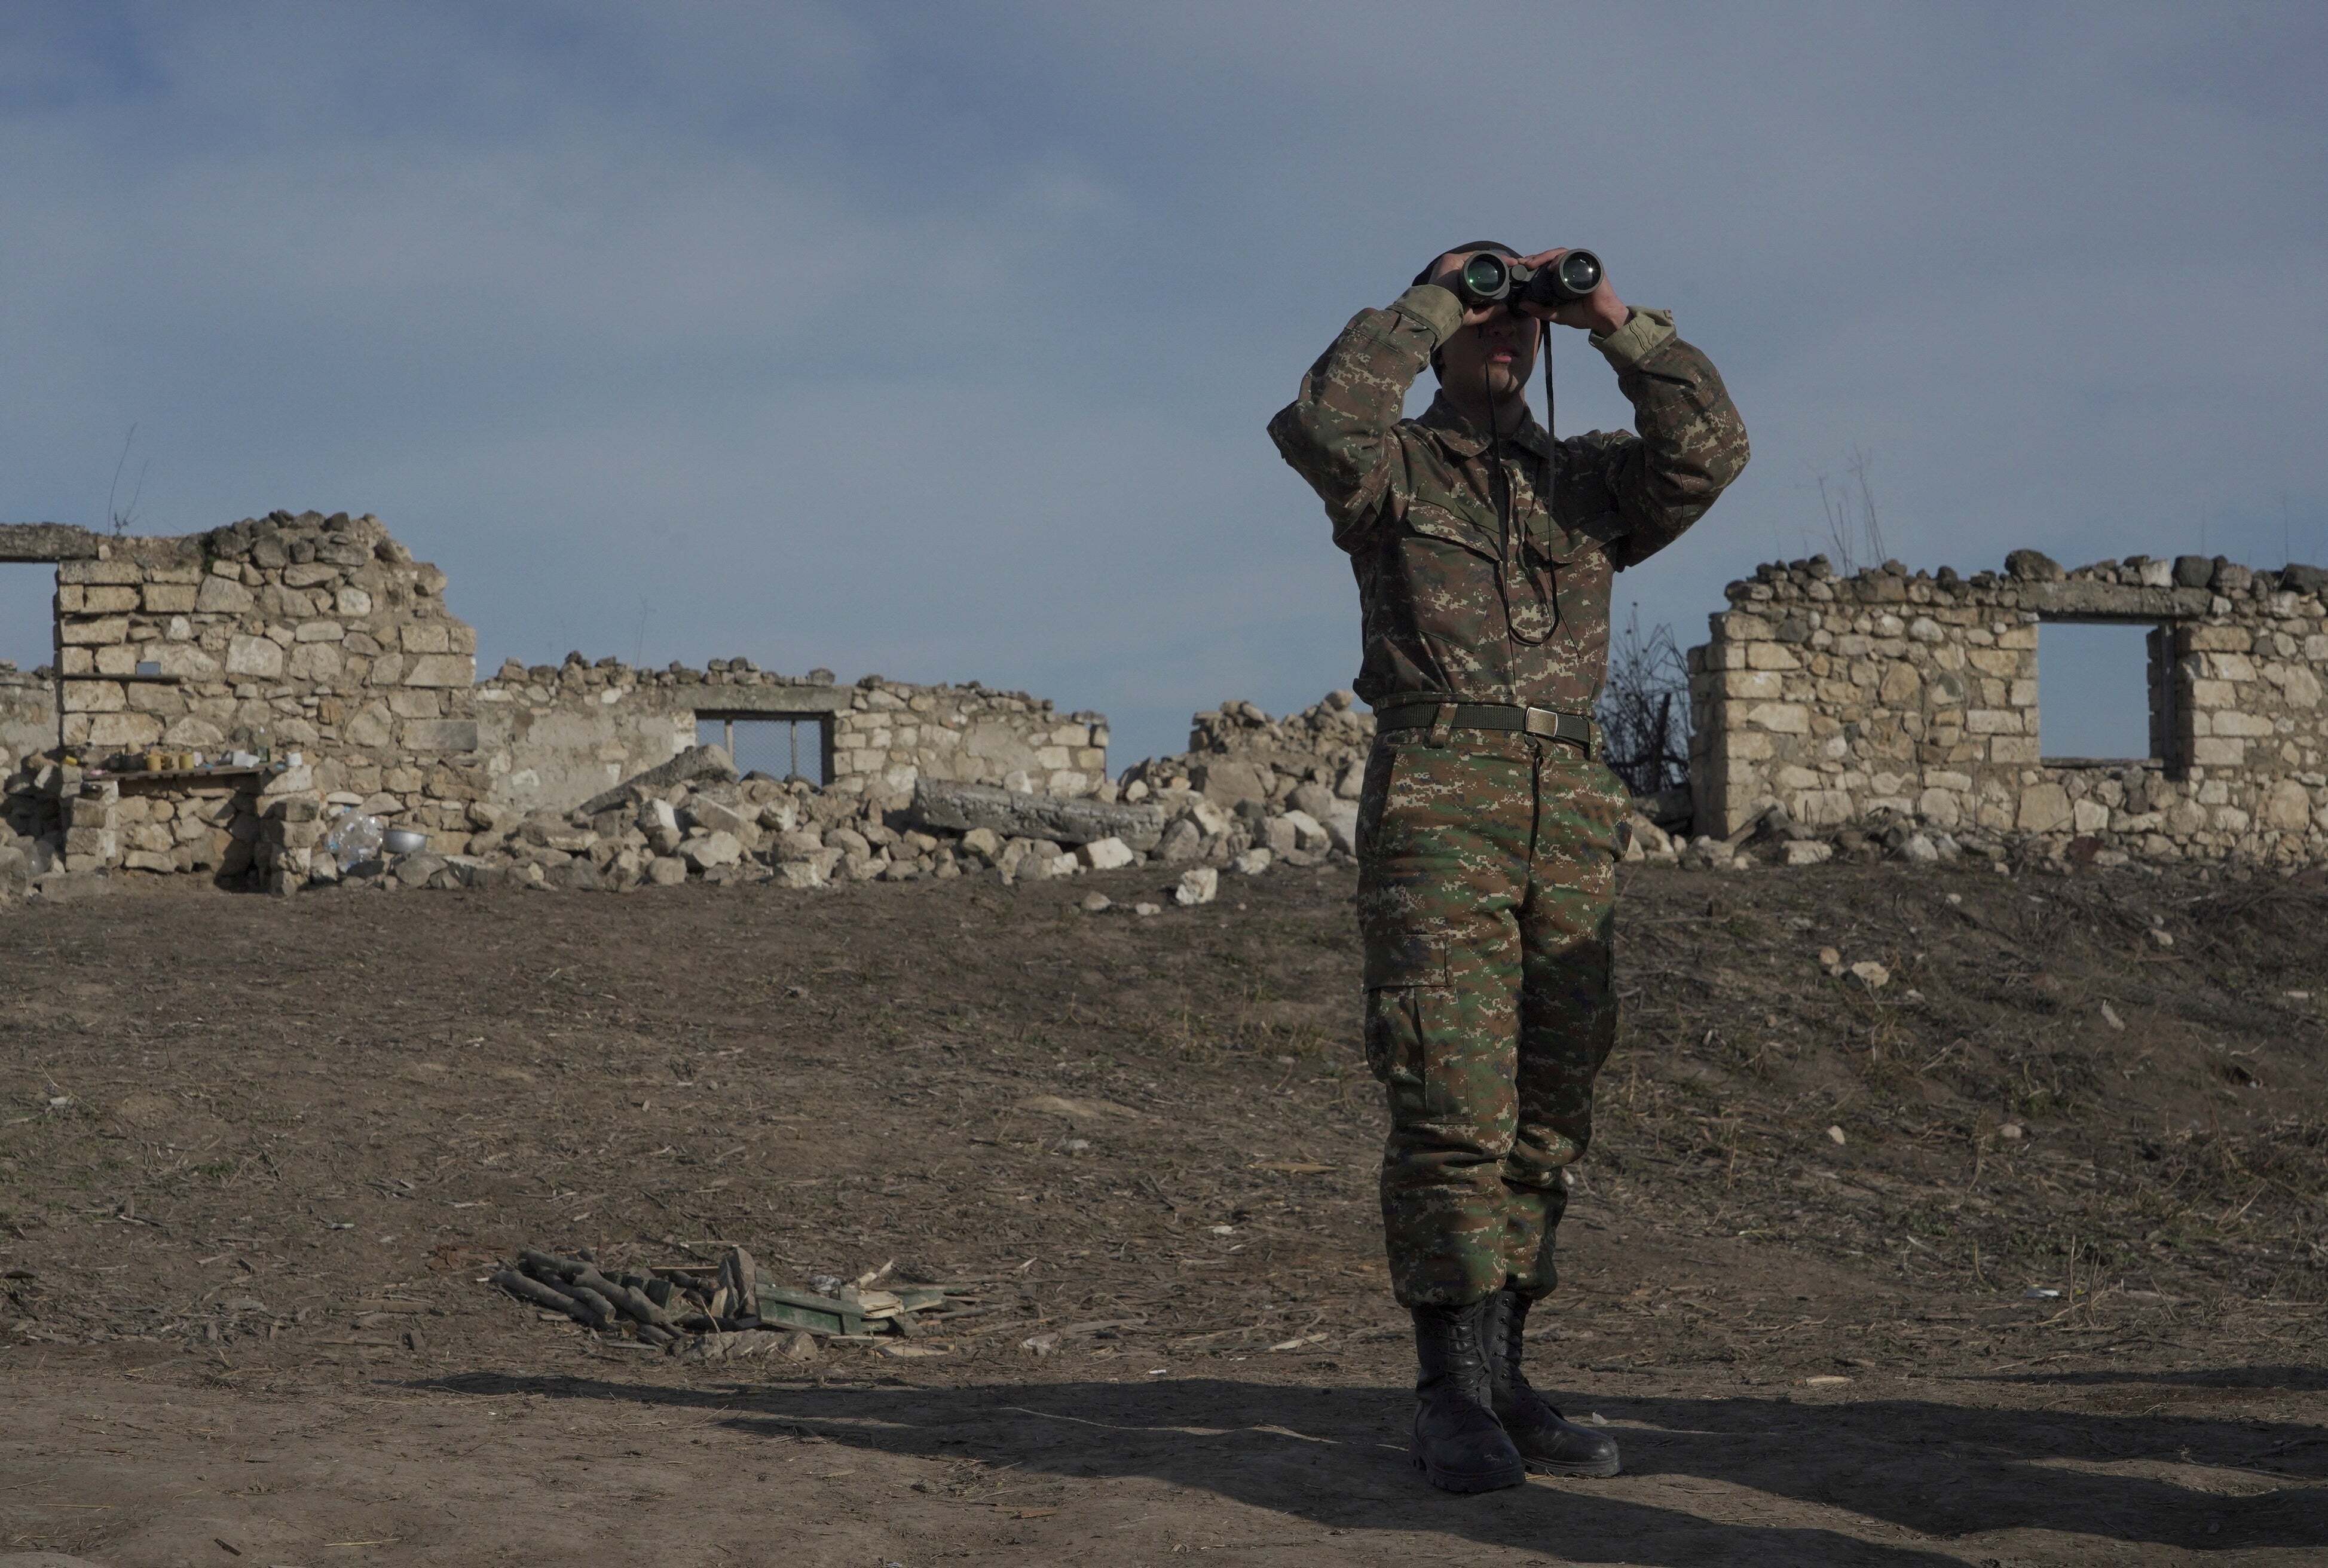  An ethnic Armenian soldier looks through binoculars as he stands at fighting positions near the village of Taghavard in the region of Nagorno-Karabakh